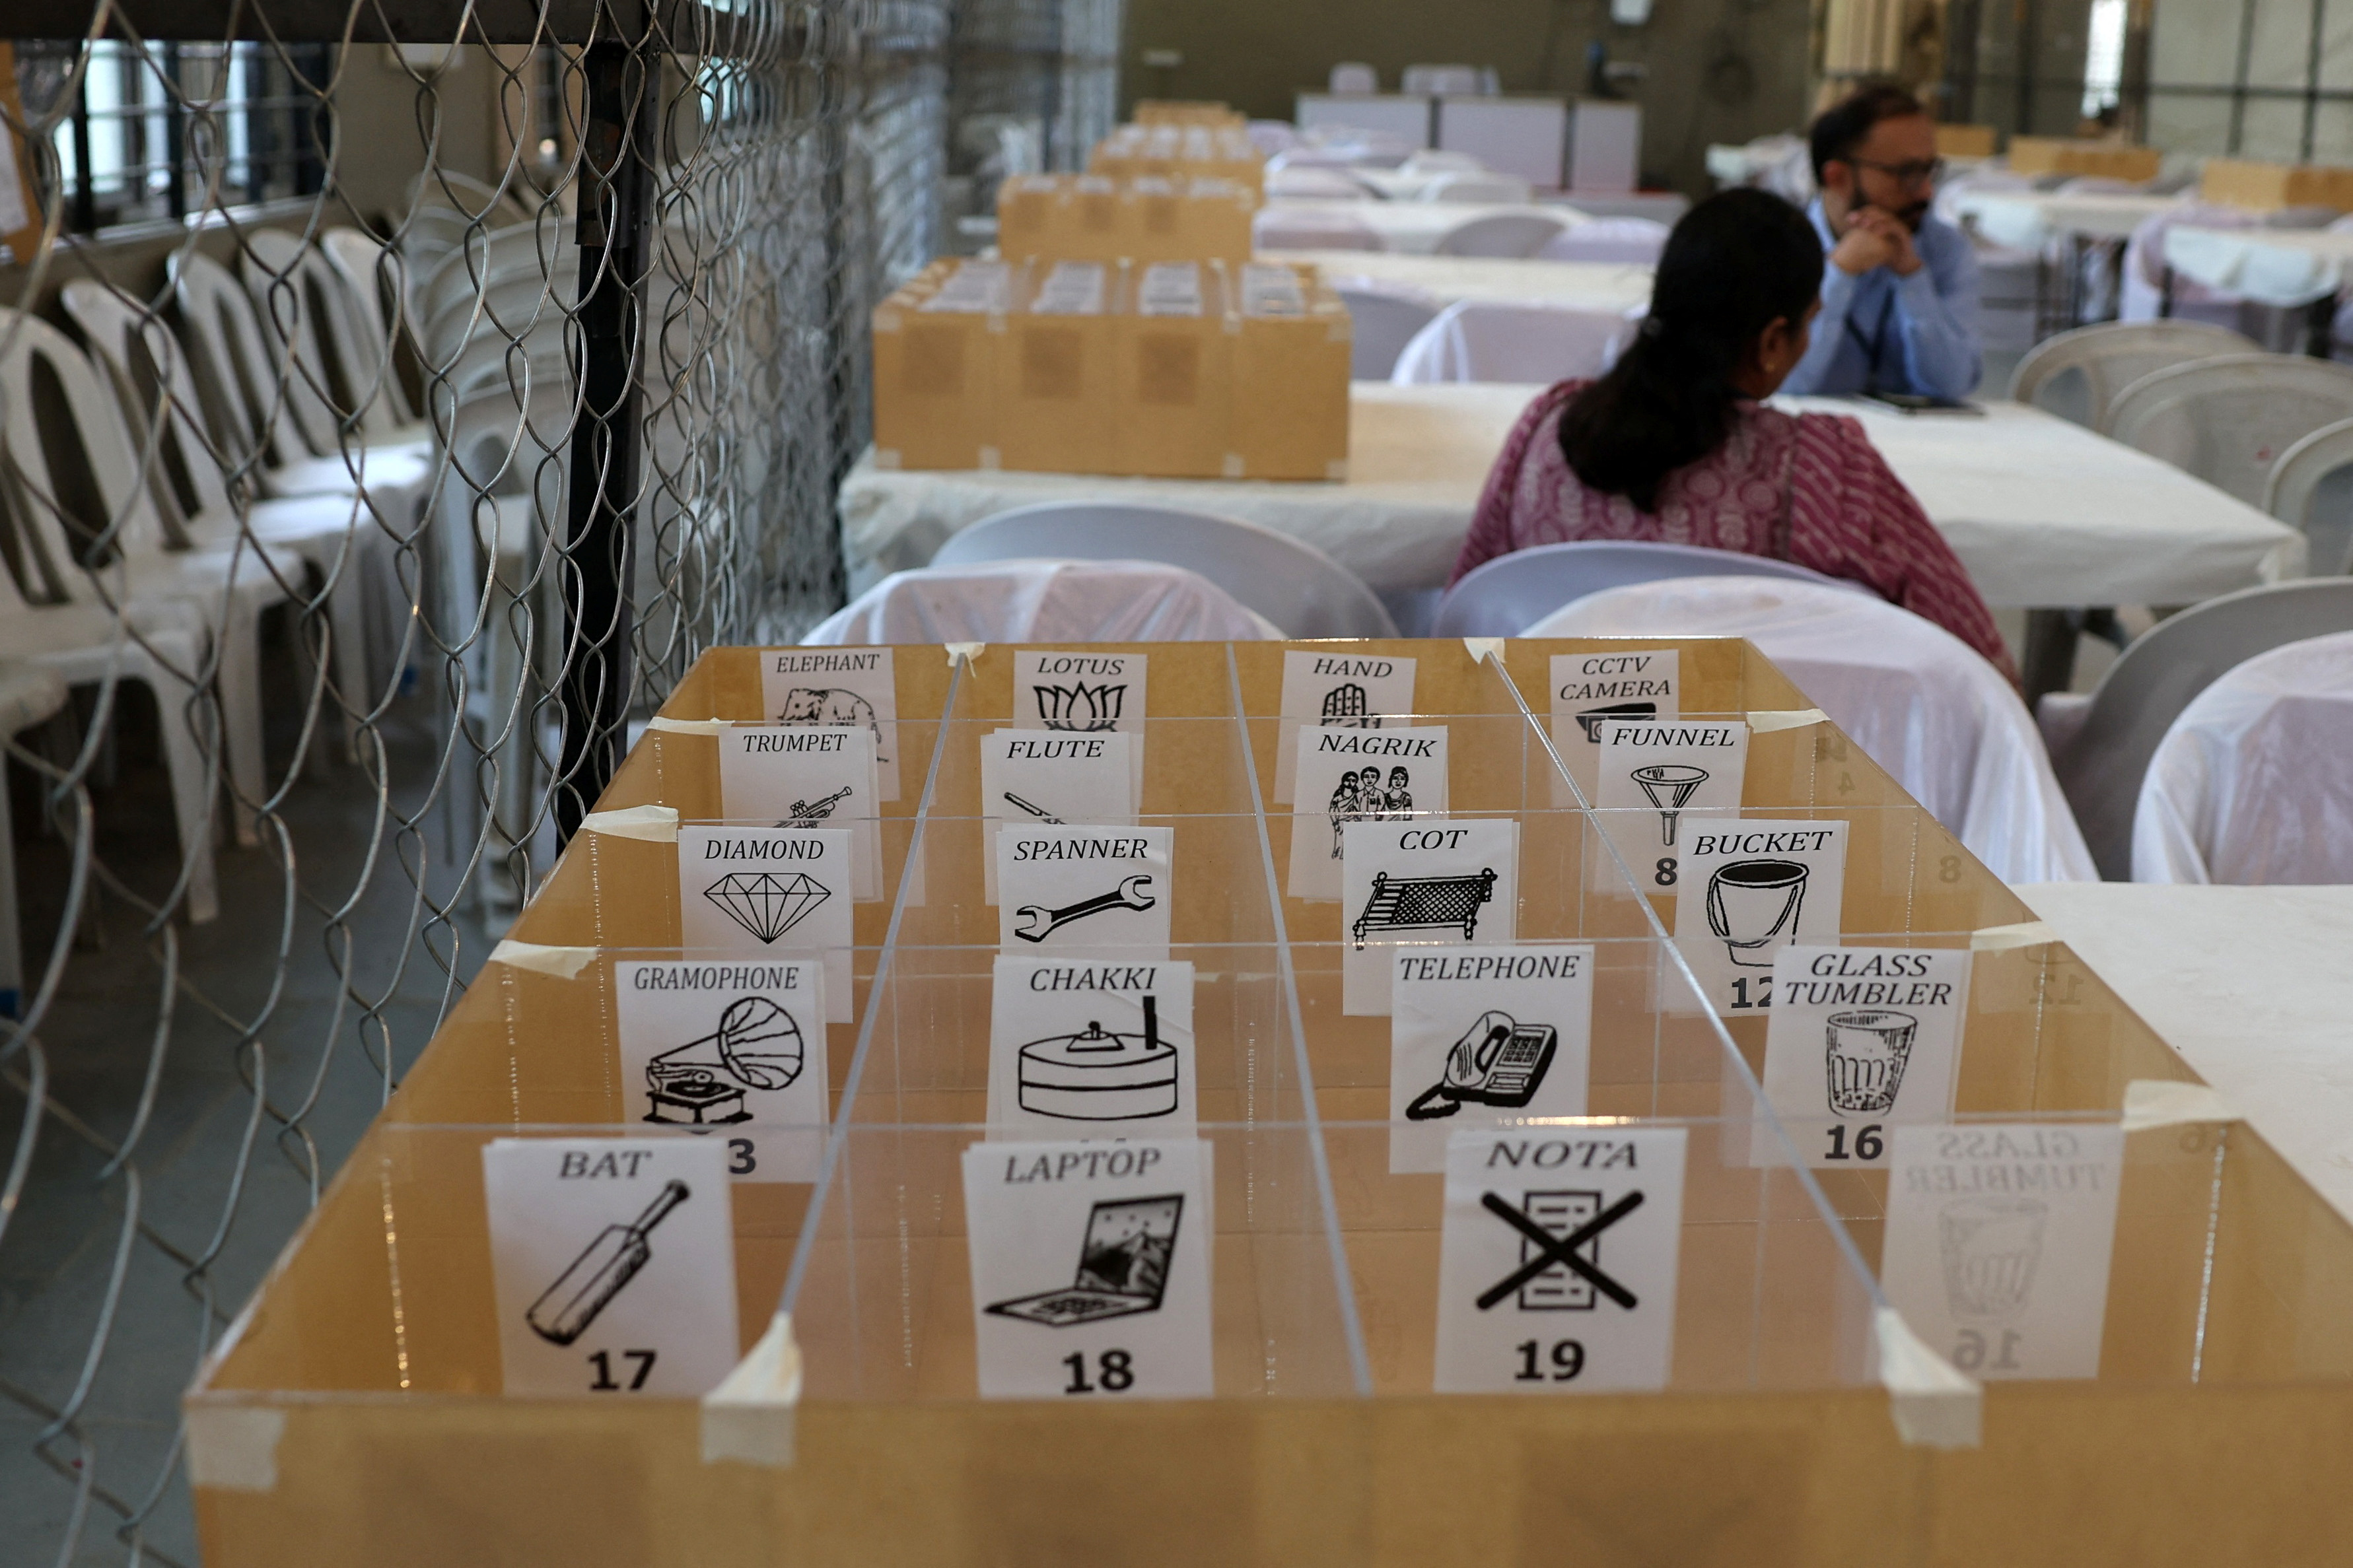 Preparations ahead of vote counting, in Ahmedabad